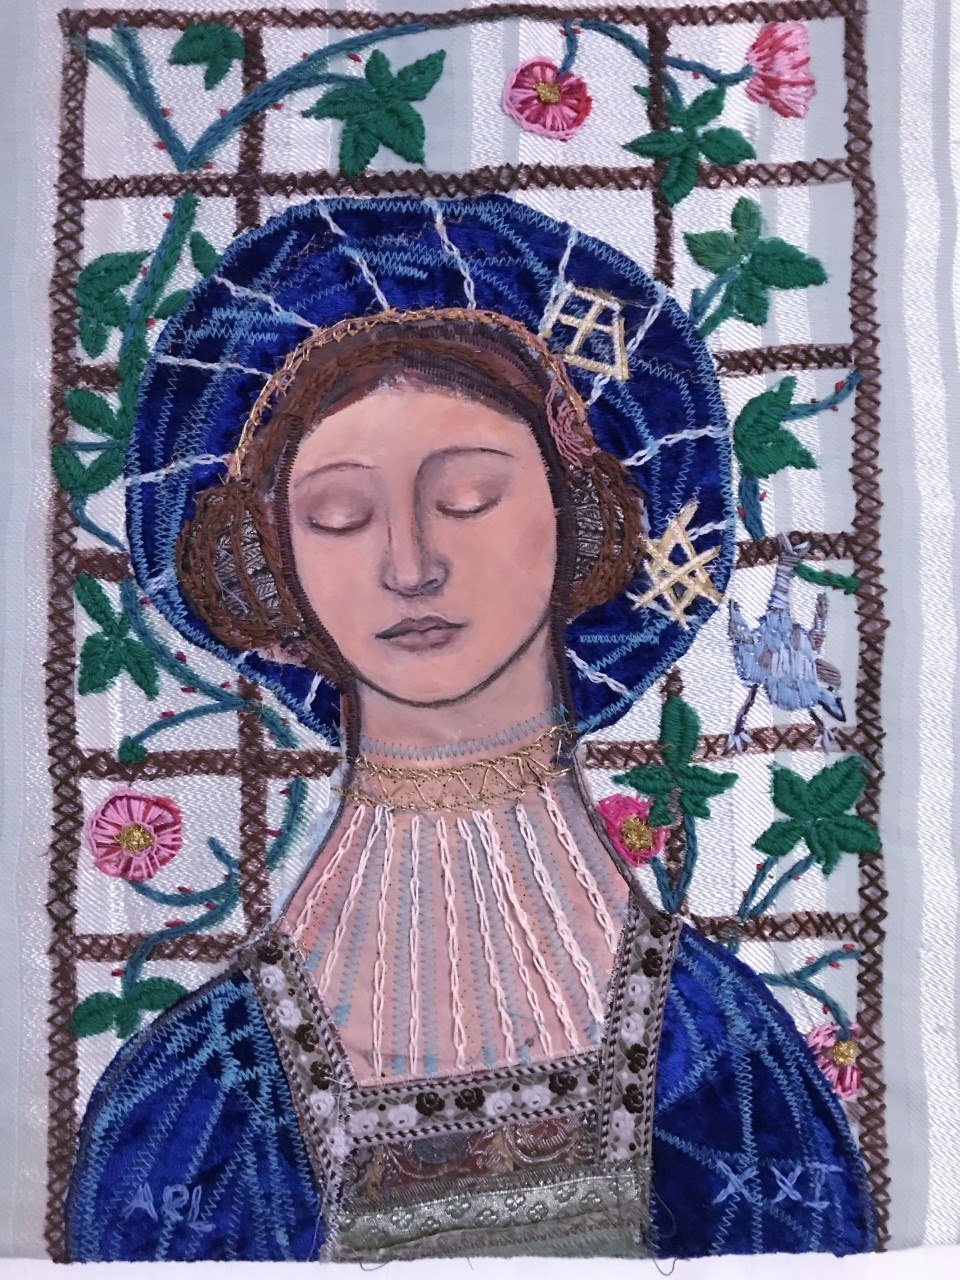 TUDOR LADY by Alice Lenkiewicz, embroidery inspired by wooden statue of a Tudor lady with William Morris wallpaper in the background, MEG display at NW Regional Day 2021